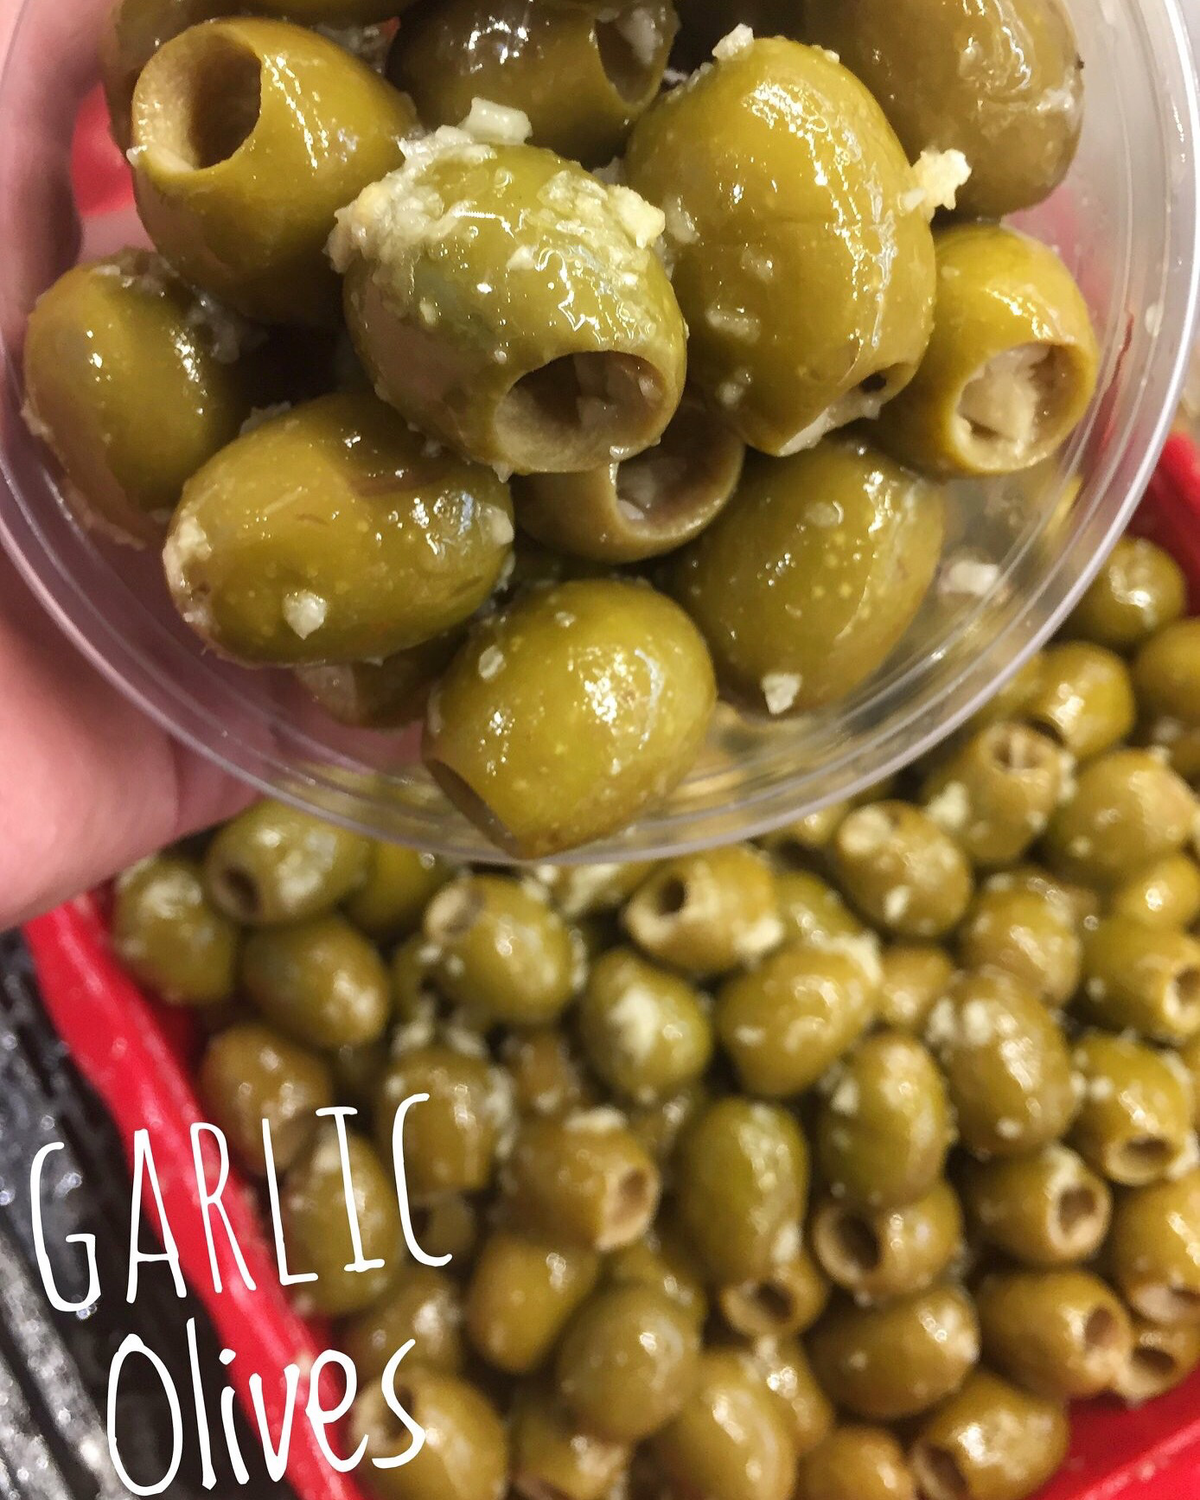 Garlic Pitted Green Olives - 1/2 Lb